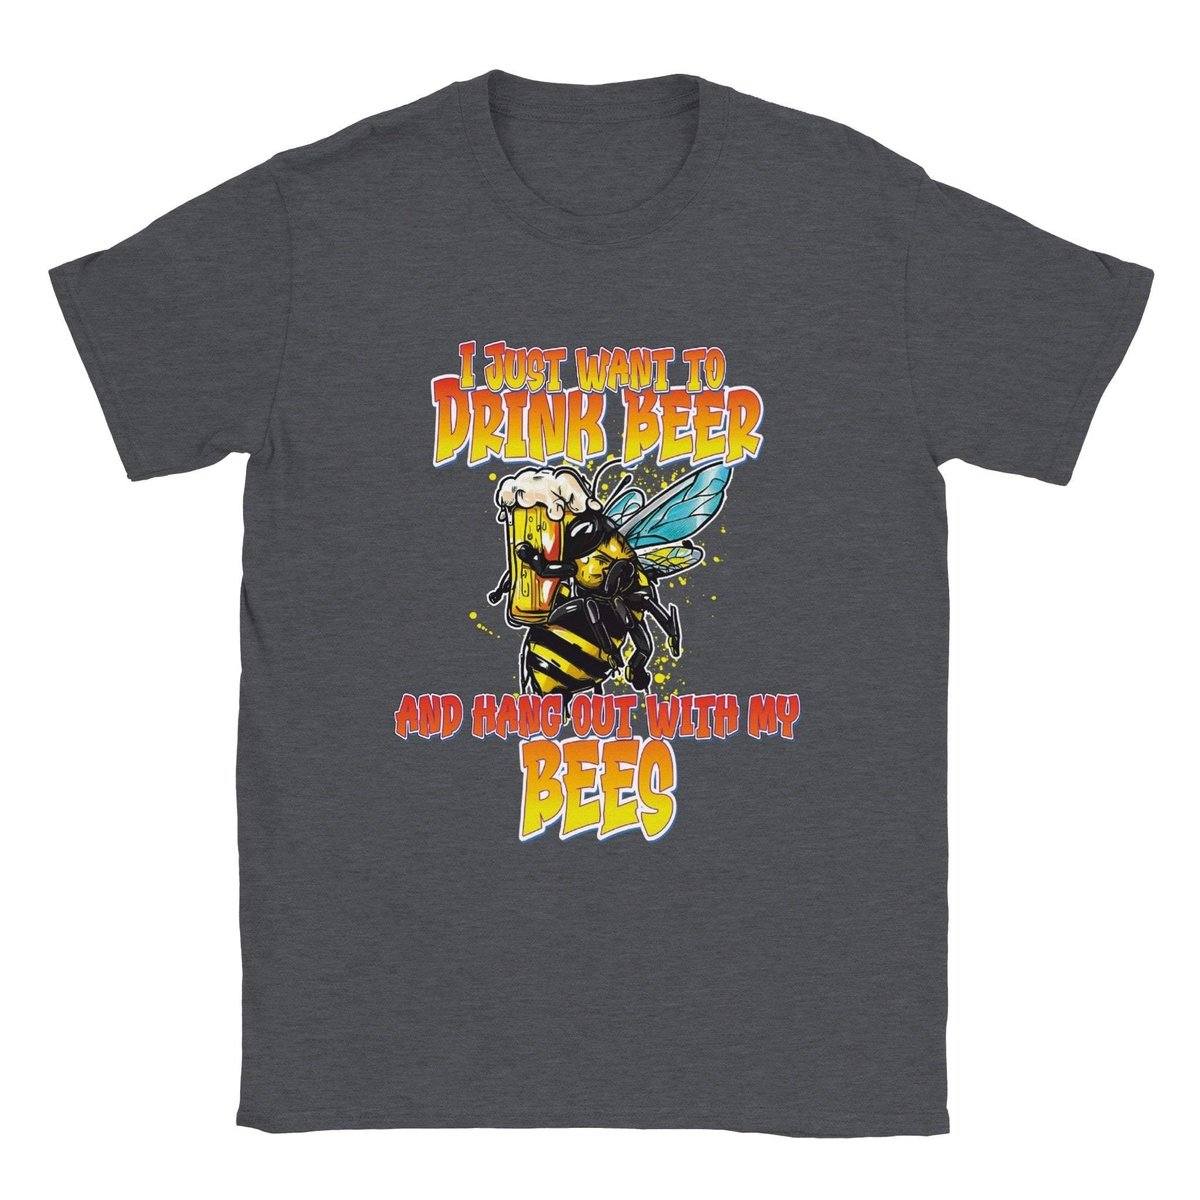 I just want to drink beer and hang out with my bees - Classic Unisex Crewneck T-shirt Adults T-Shirts Unisex Dark Heather / S Bee Clothing Australia